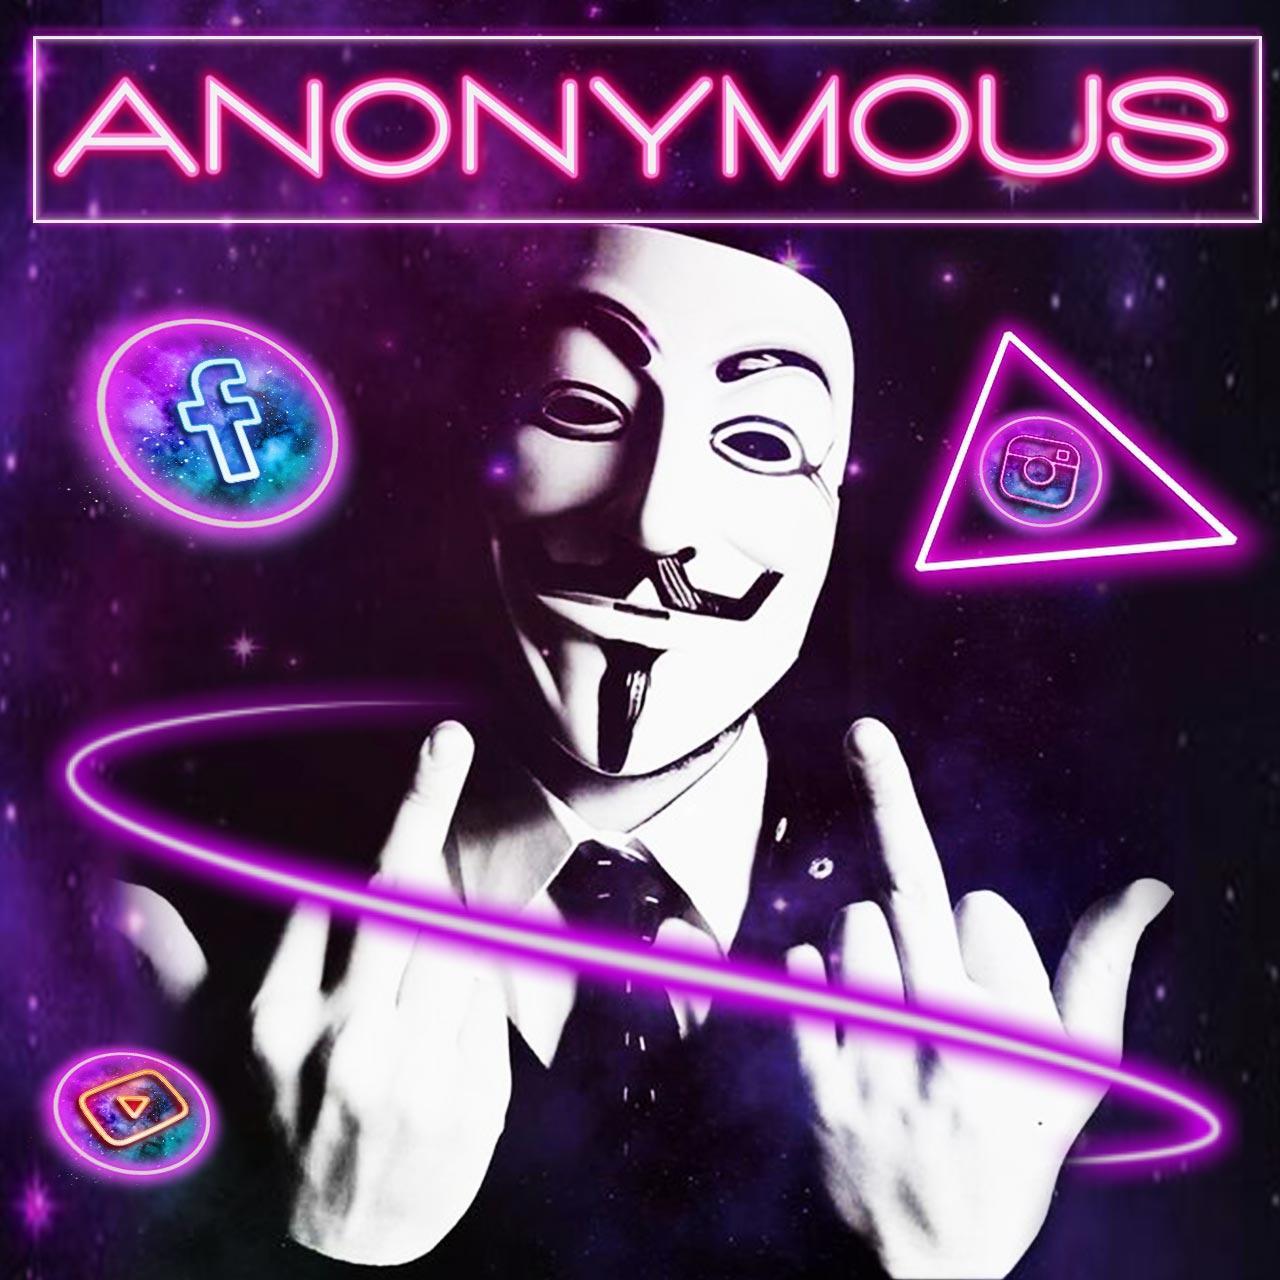 Anonymous Hacker Face Mask Themes & Wallpaper for Android